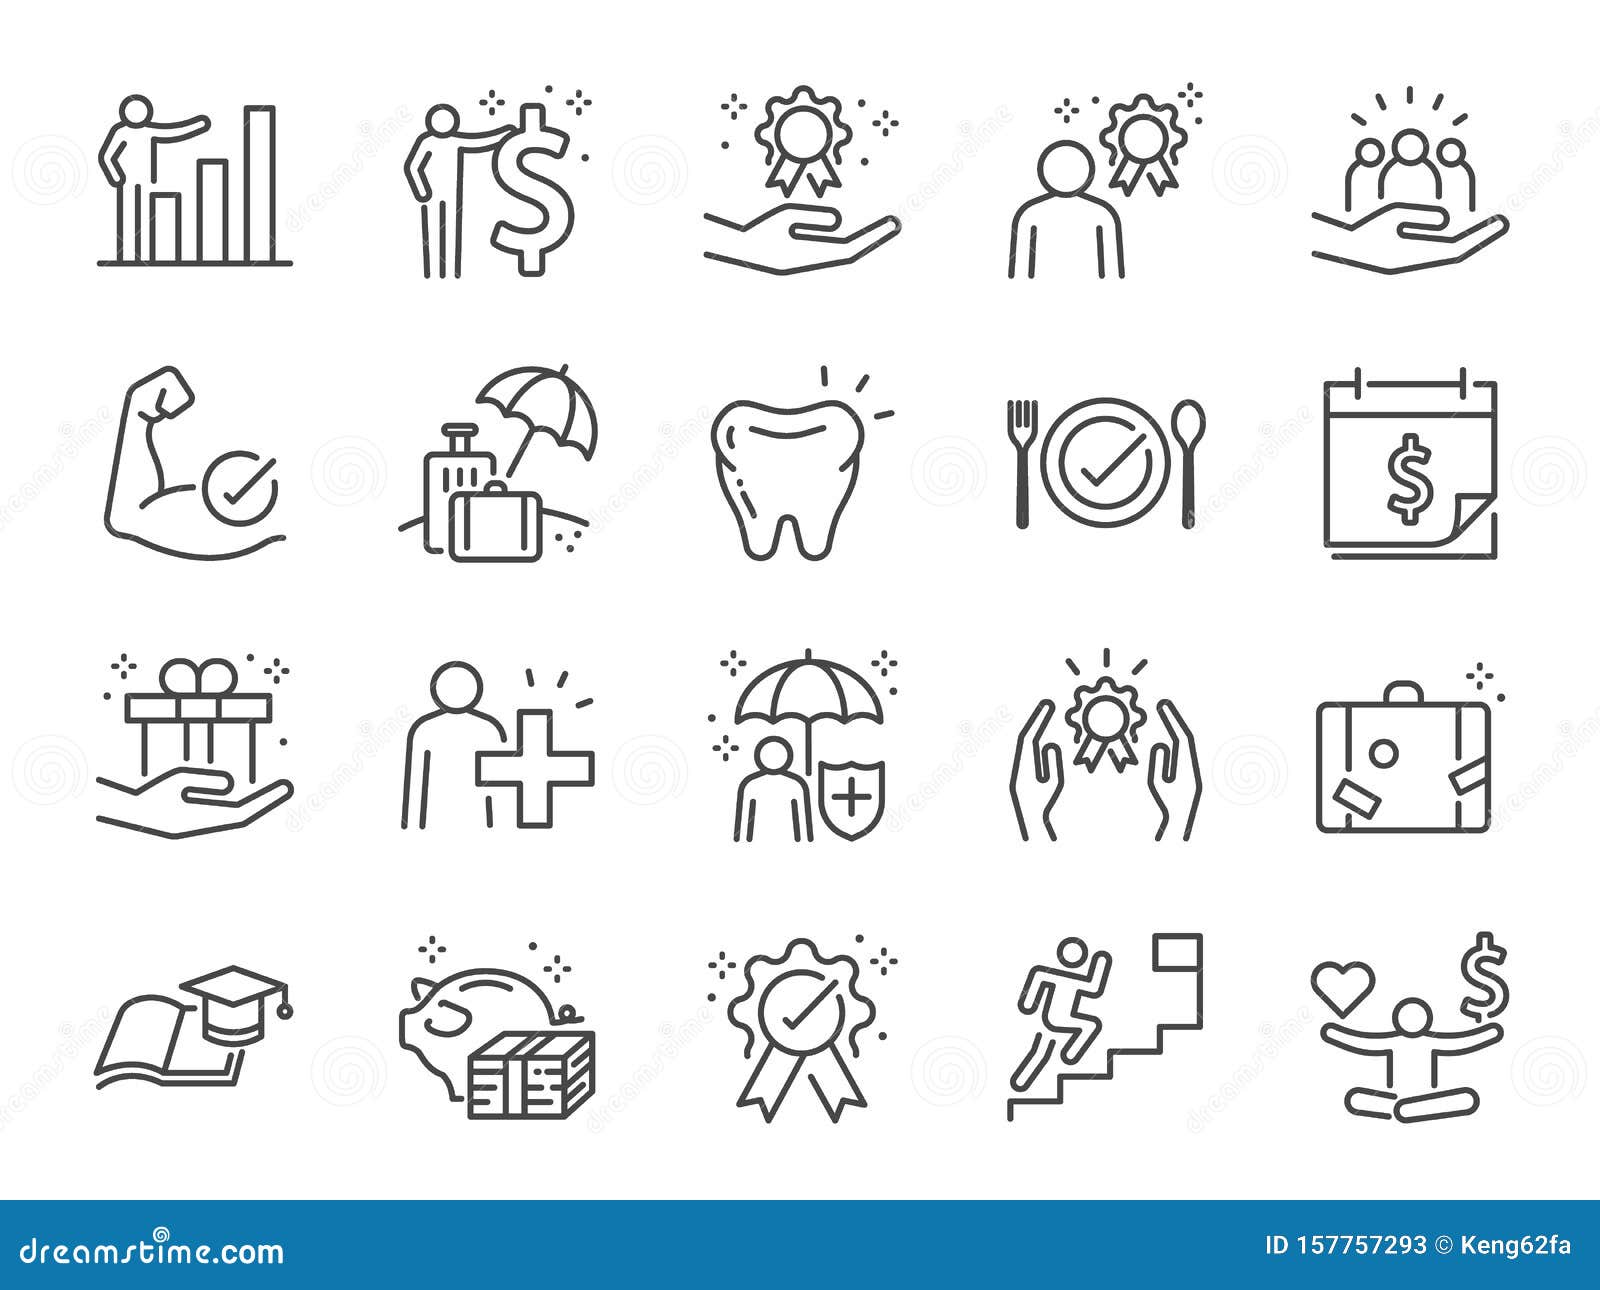 employees benefits line icon set. included icons as teamwork, people relationship, growth chart, staff perks, insurance and more.